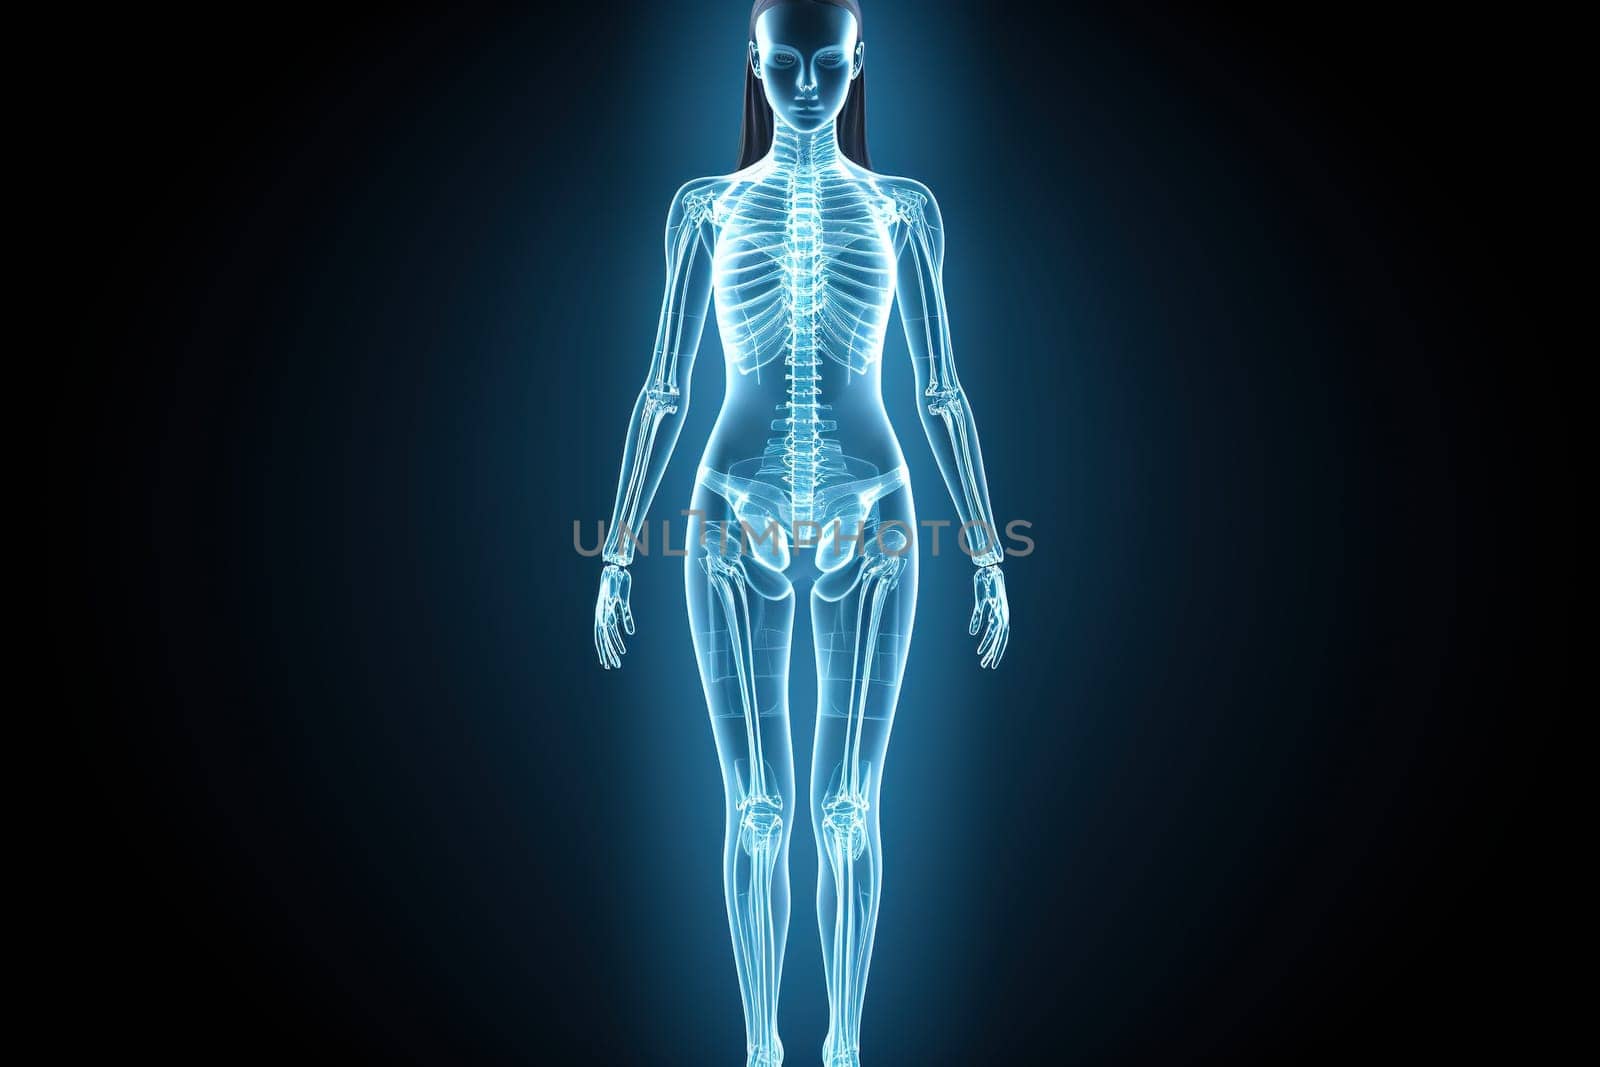 Full body x-ray of a female robot against a dark background.